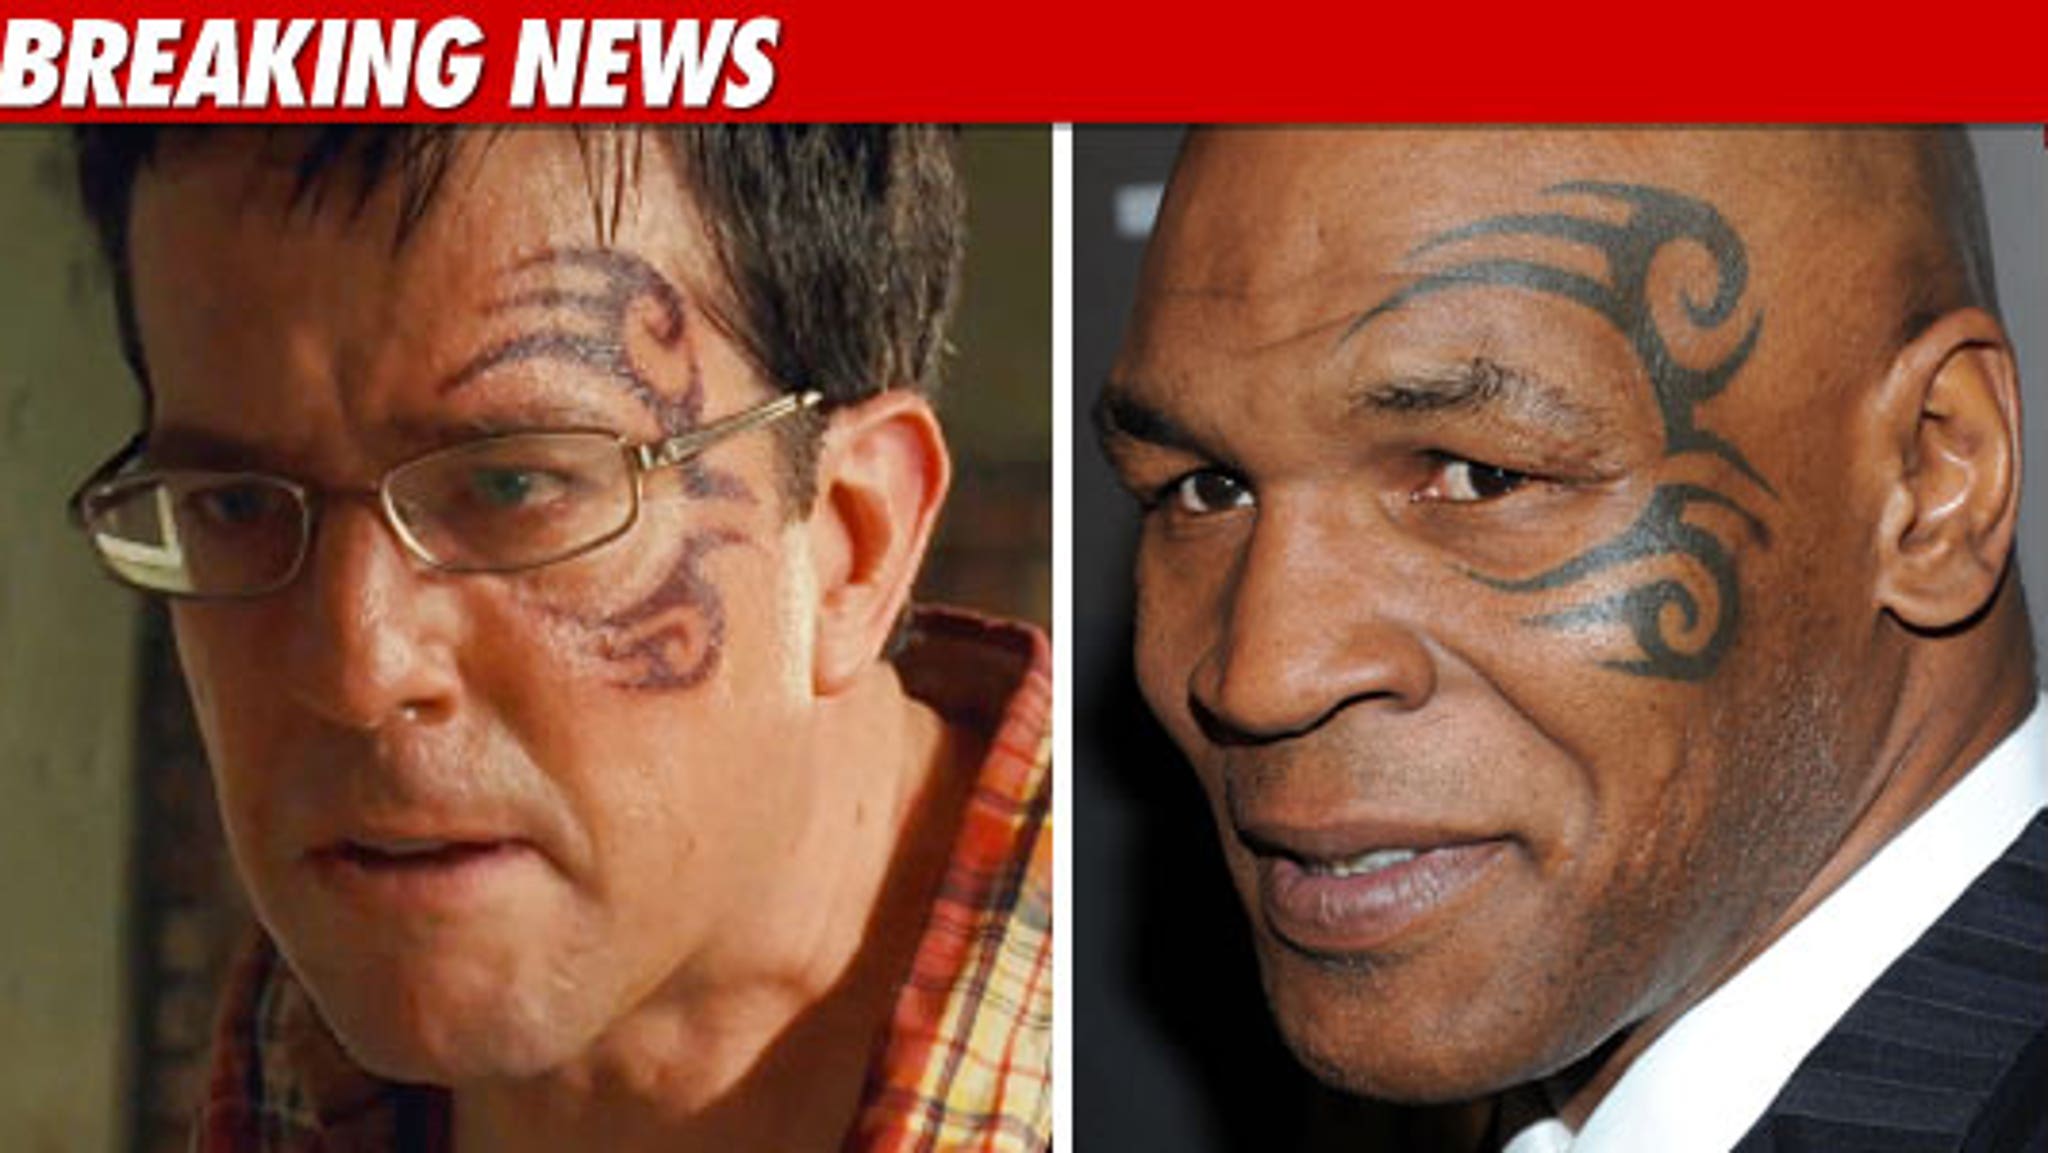 The story behind Mike Tyson's infamous face tattoo with